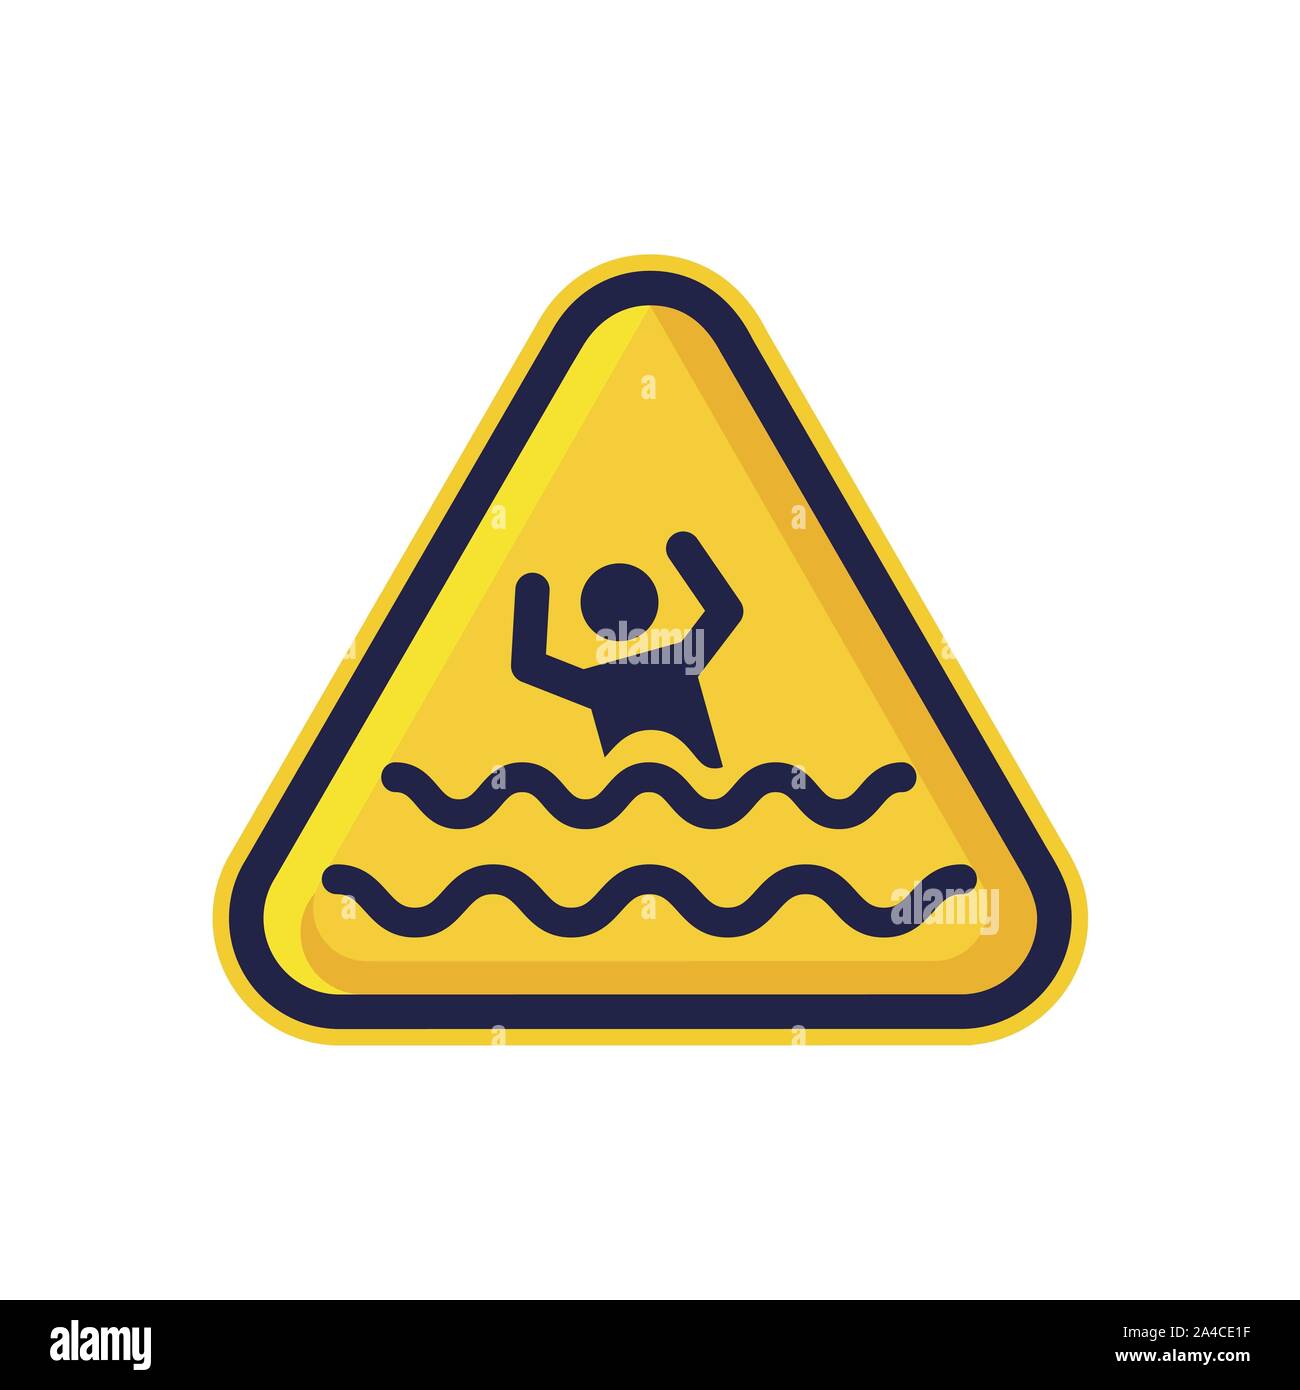 Beware Of Drowning Sign Isolated On White Background. Triangle Warning Symbol Simple, Flat Vector, Icon You Can Use Your Website Design, Mobile App Or Stock Photo